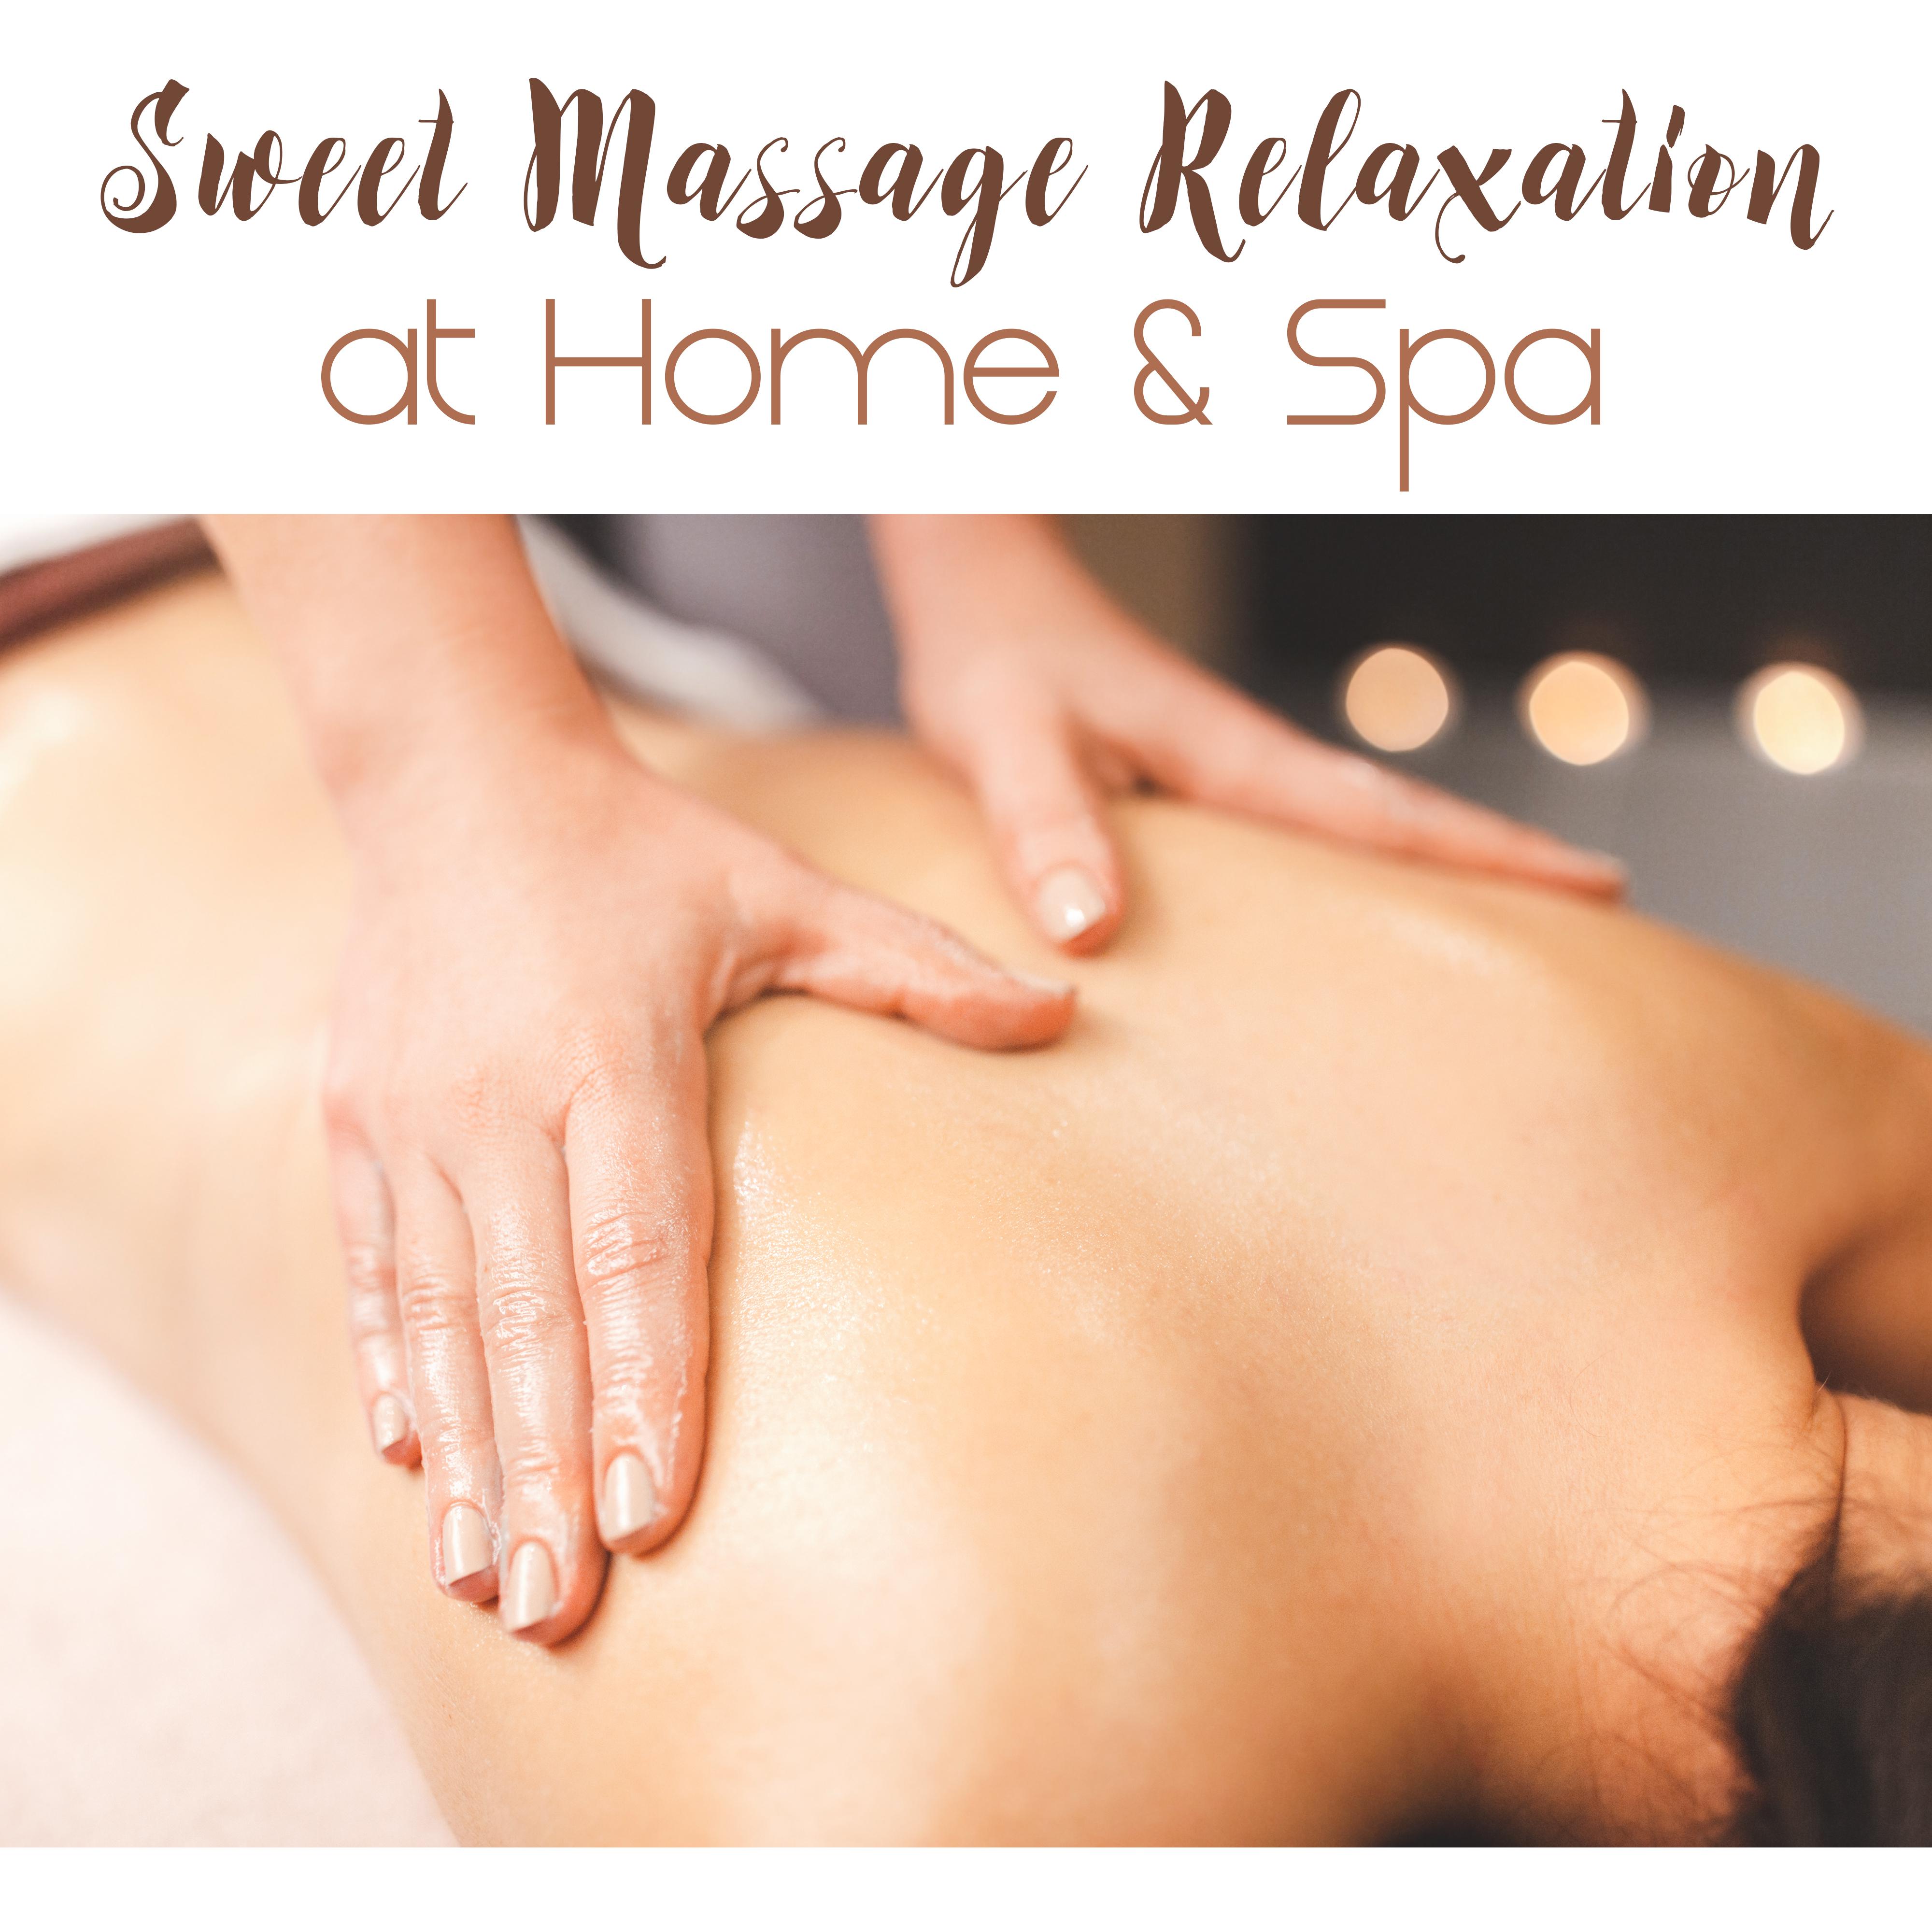 Sweet Massage Relaxation at Home & Spa